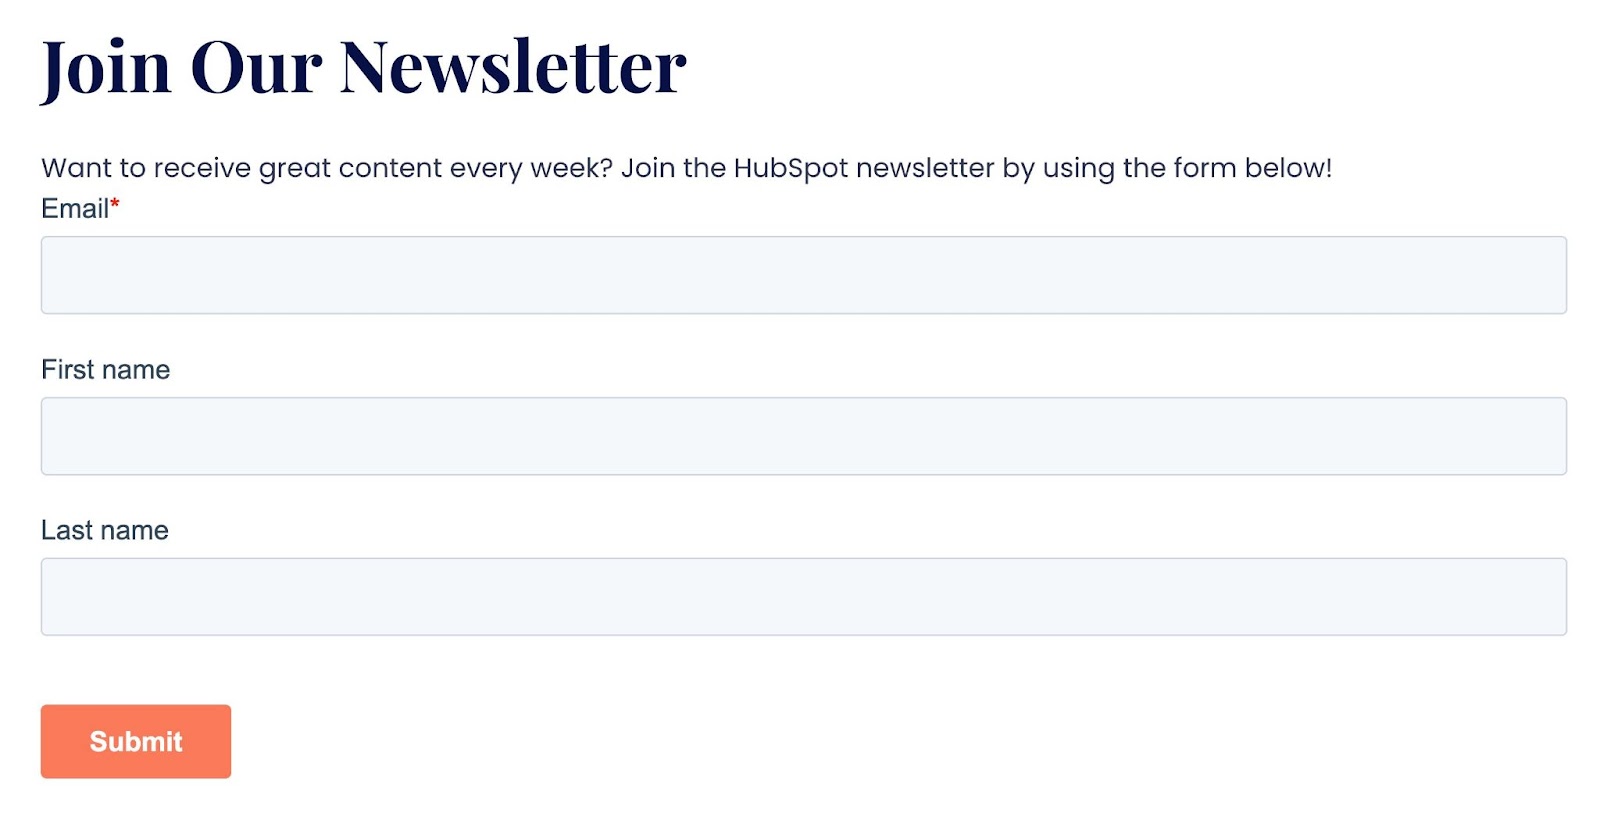  An example of an opt-in form from the HubSpot WordPress newsletter plugin